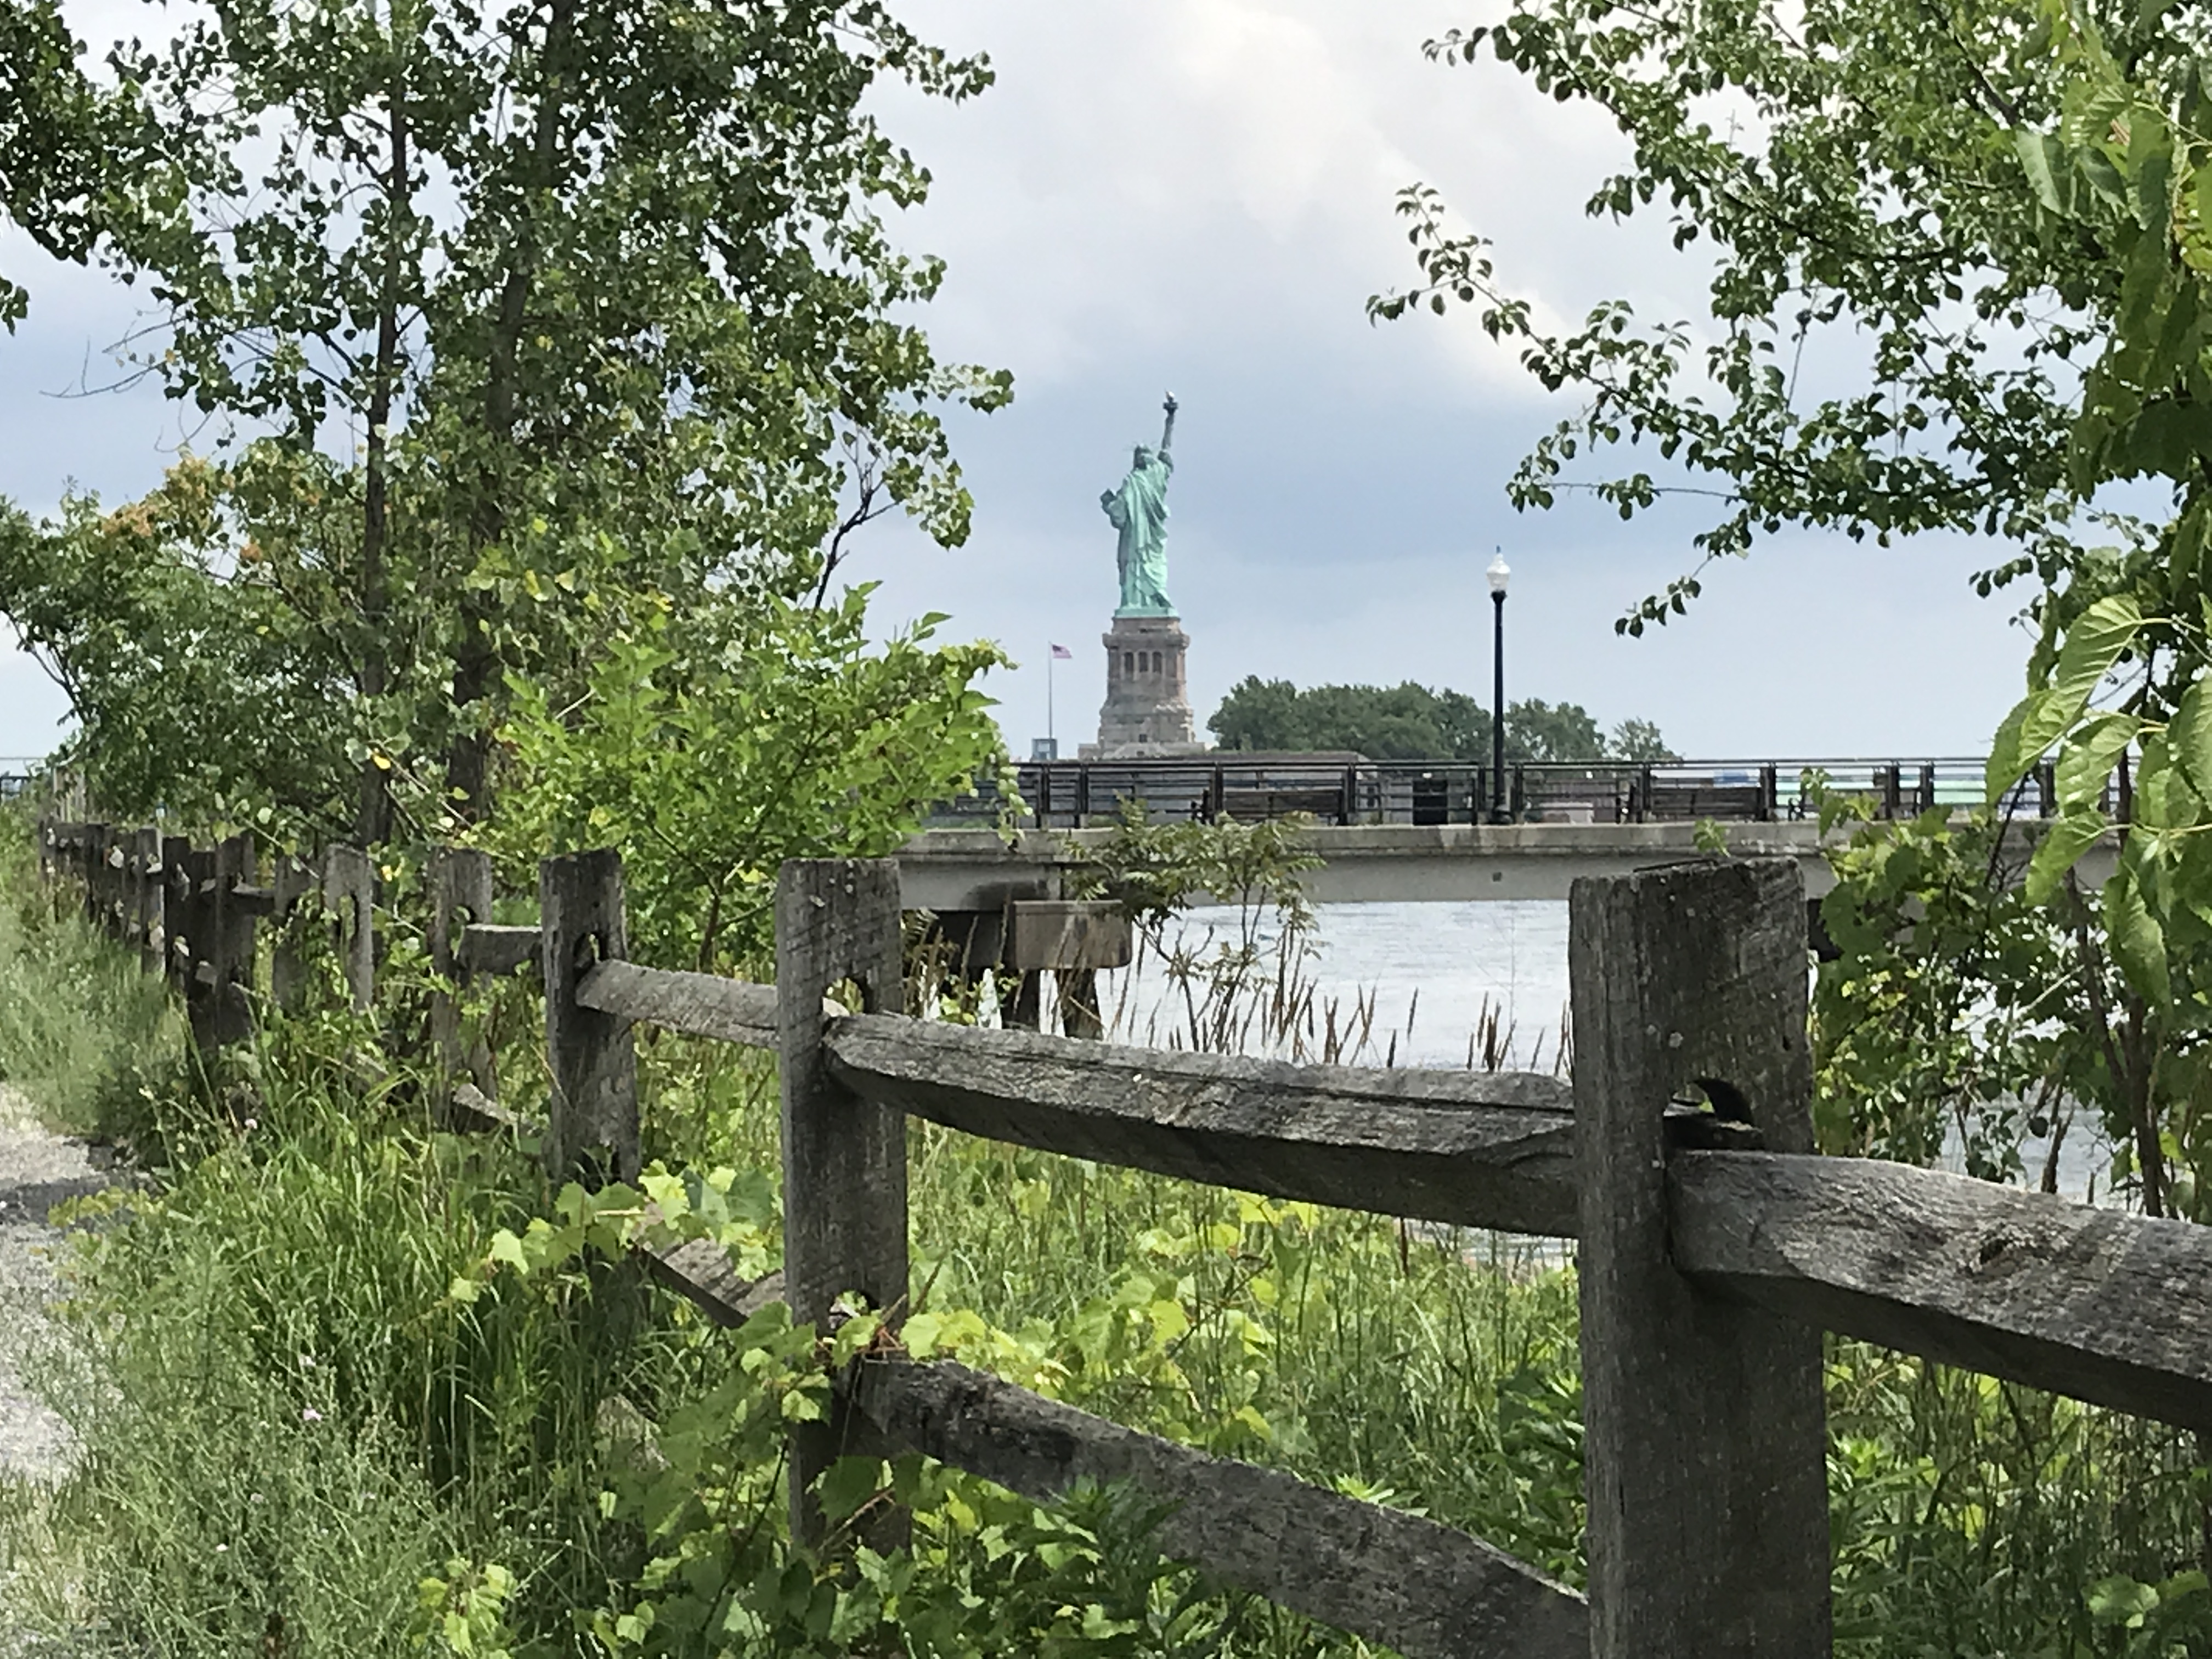 The backside of the Statue of Liberty is juxtaposed with the pond, trees, and fence along a hiking nature trail in Liberty State Park, Jersey City, New Jersey, United States of America